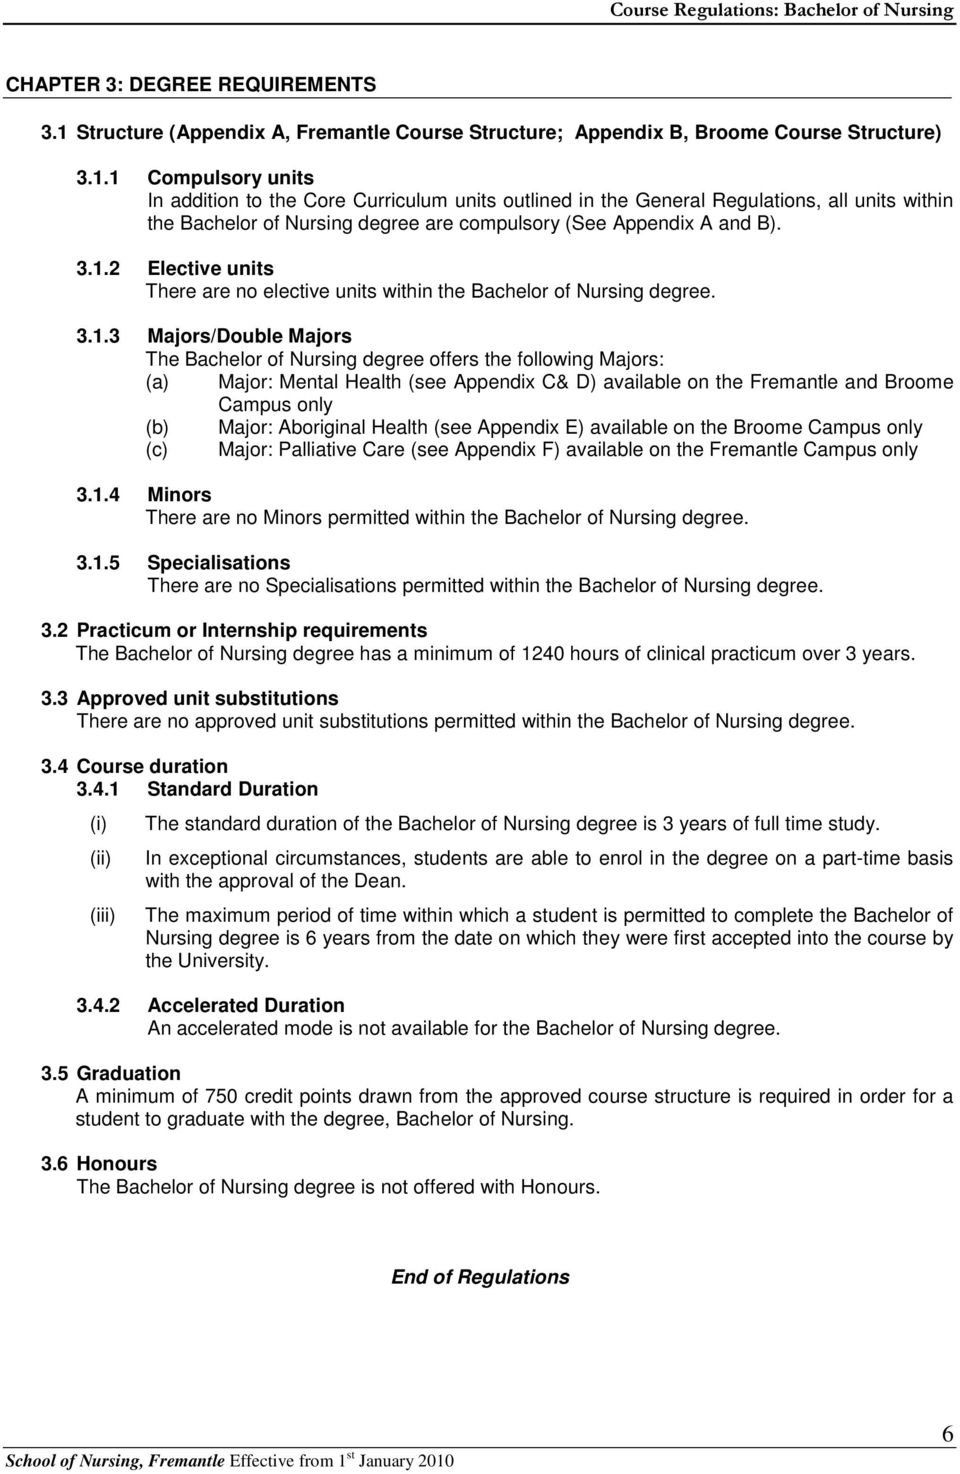 1 Compulsory units In addition to the Core Curriculum units outlined in the General Regulations, all units within the Bachelor of Nursing degree are compulsory (See Appendix A and B). 3.1.2 Elective units There are no elective units within the Bachelor of Nursing degree.